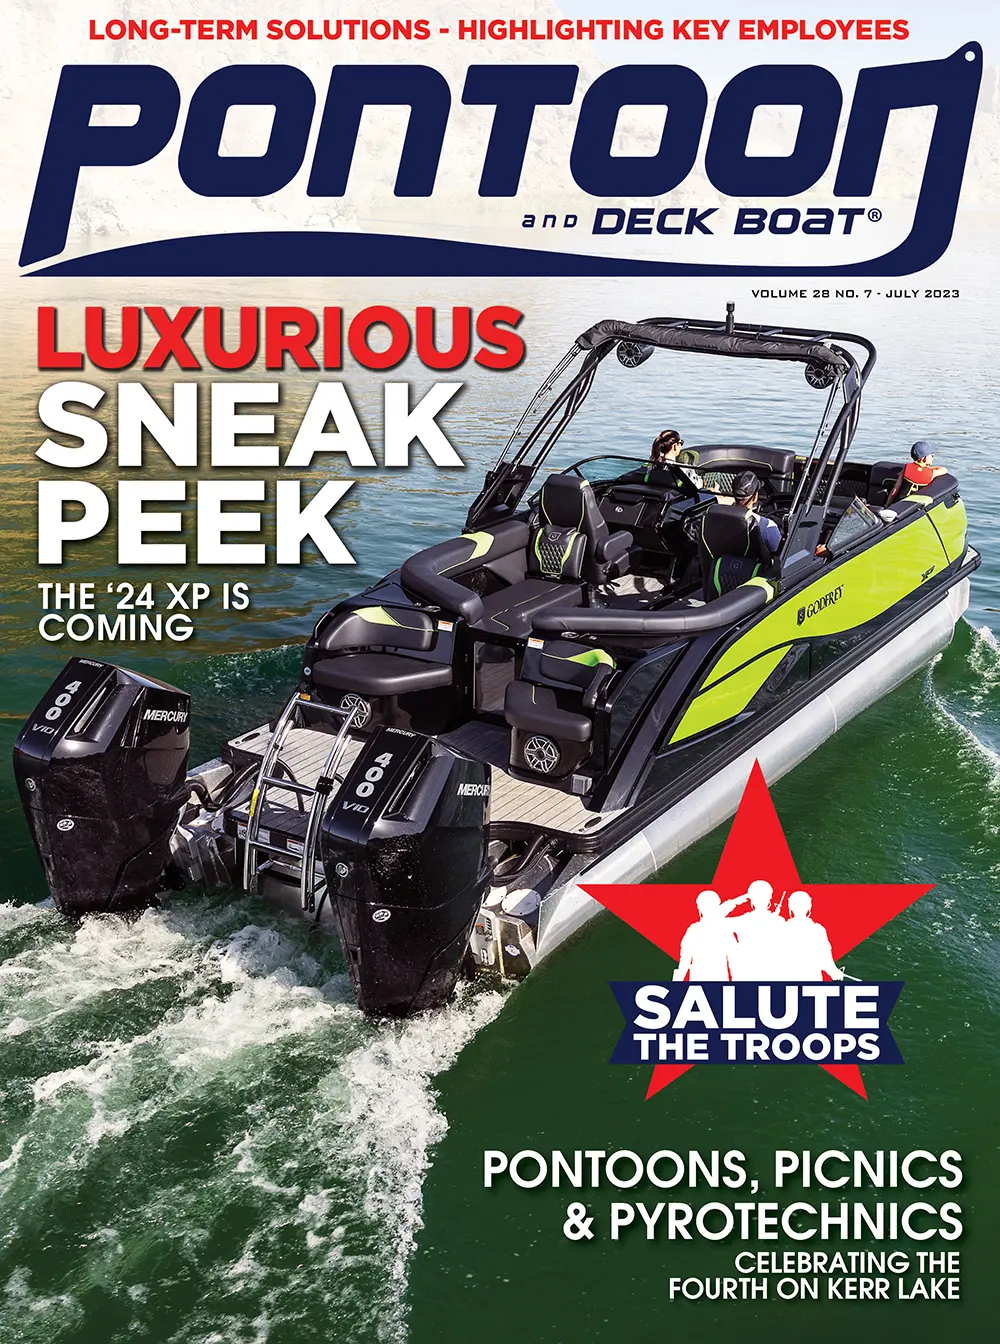 Pontoon and Deck Boat July 2023 cover